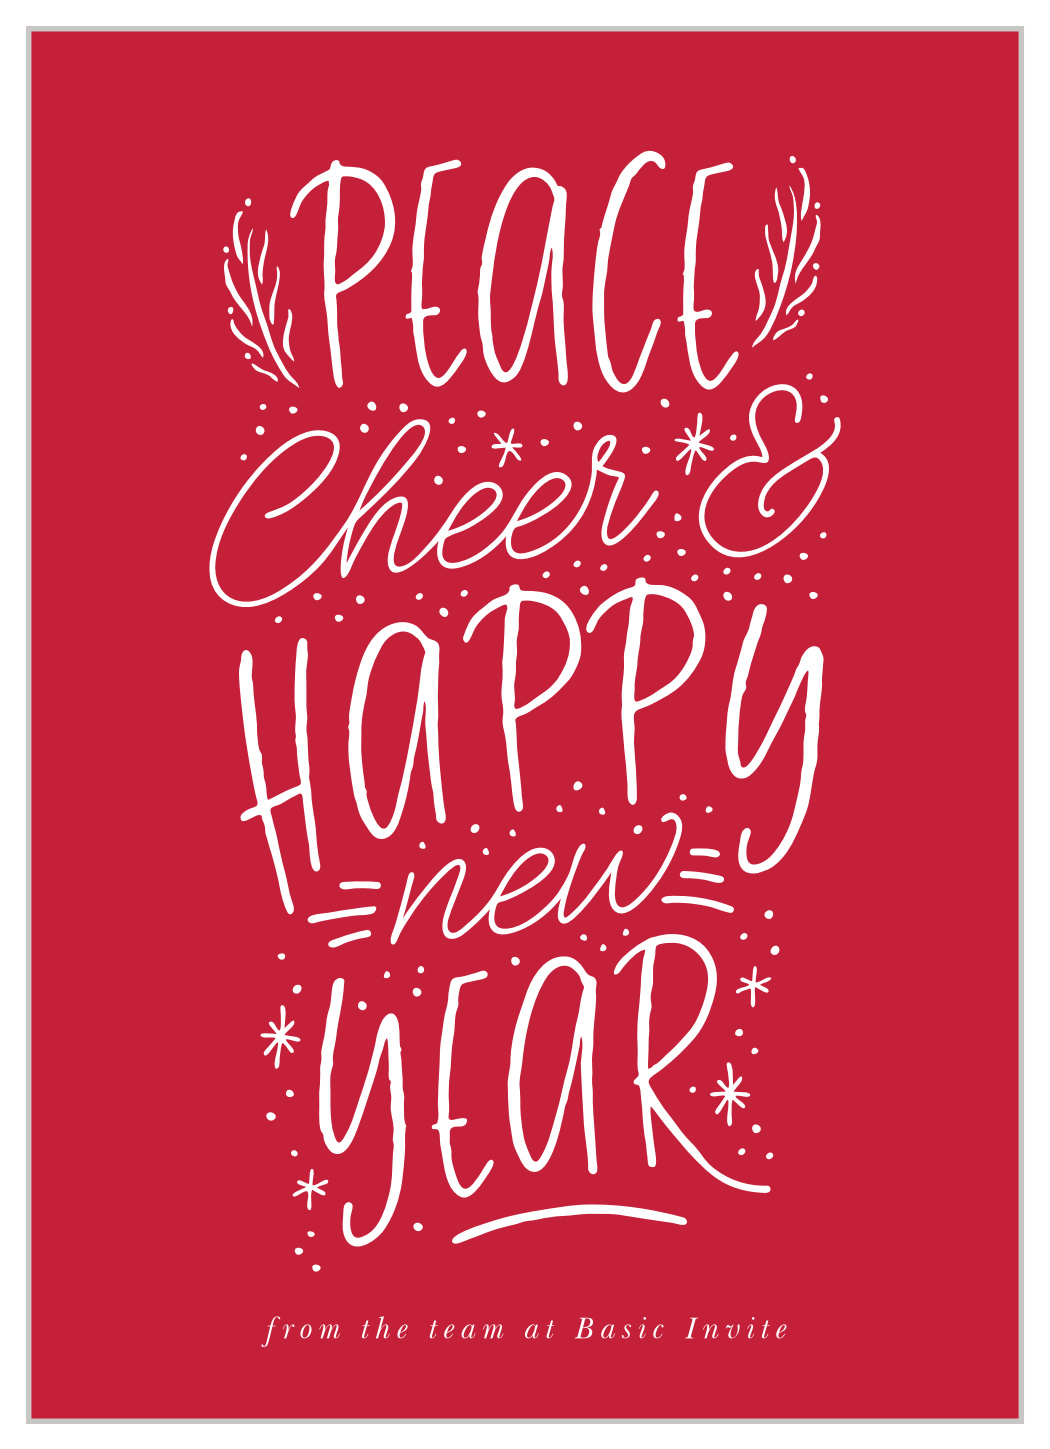 Peaceful Cheer Corporate New Years Cards